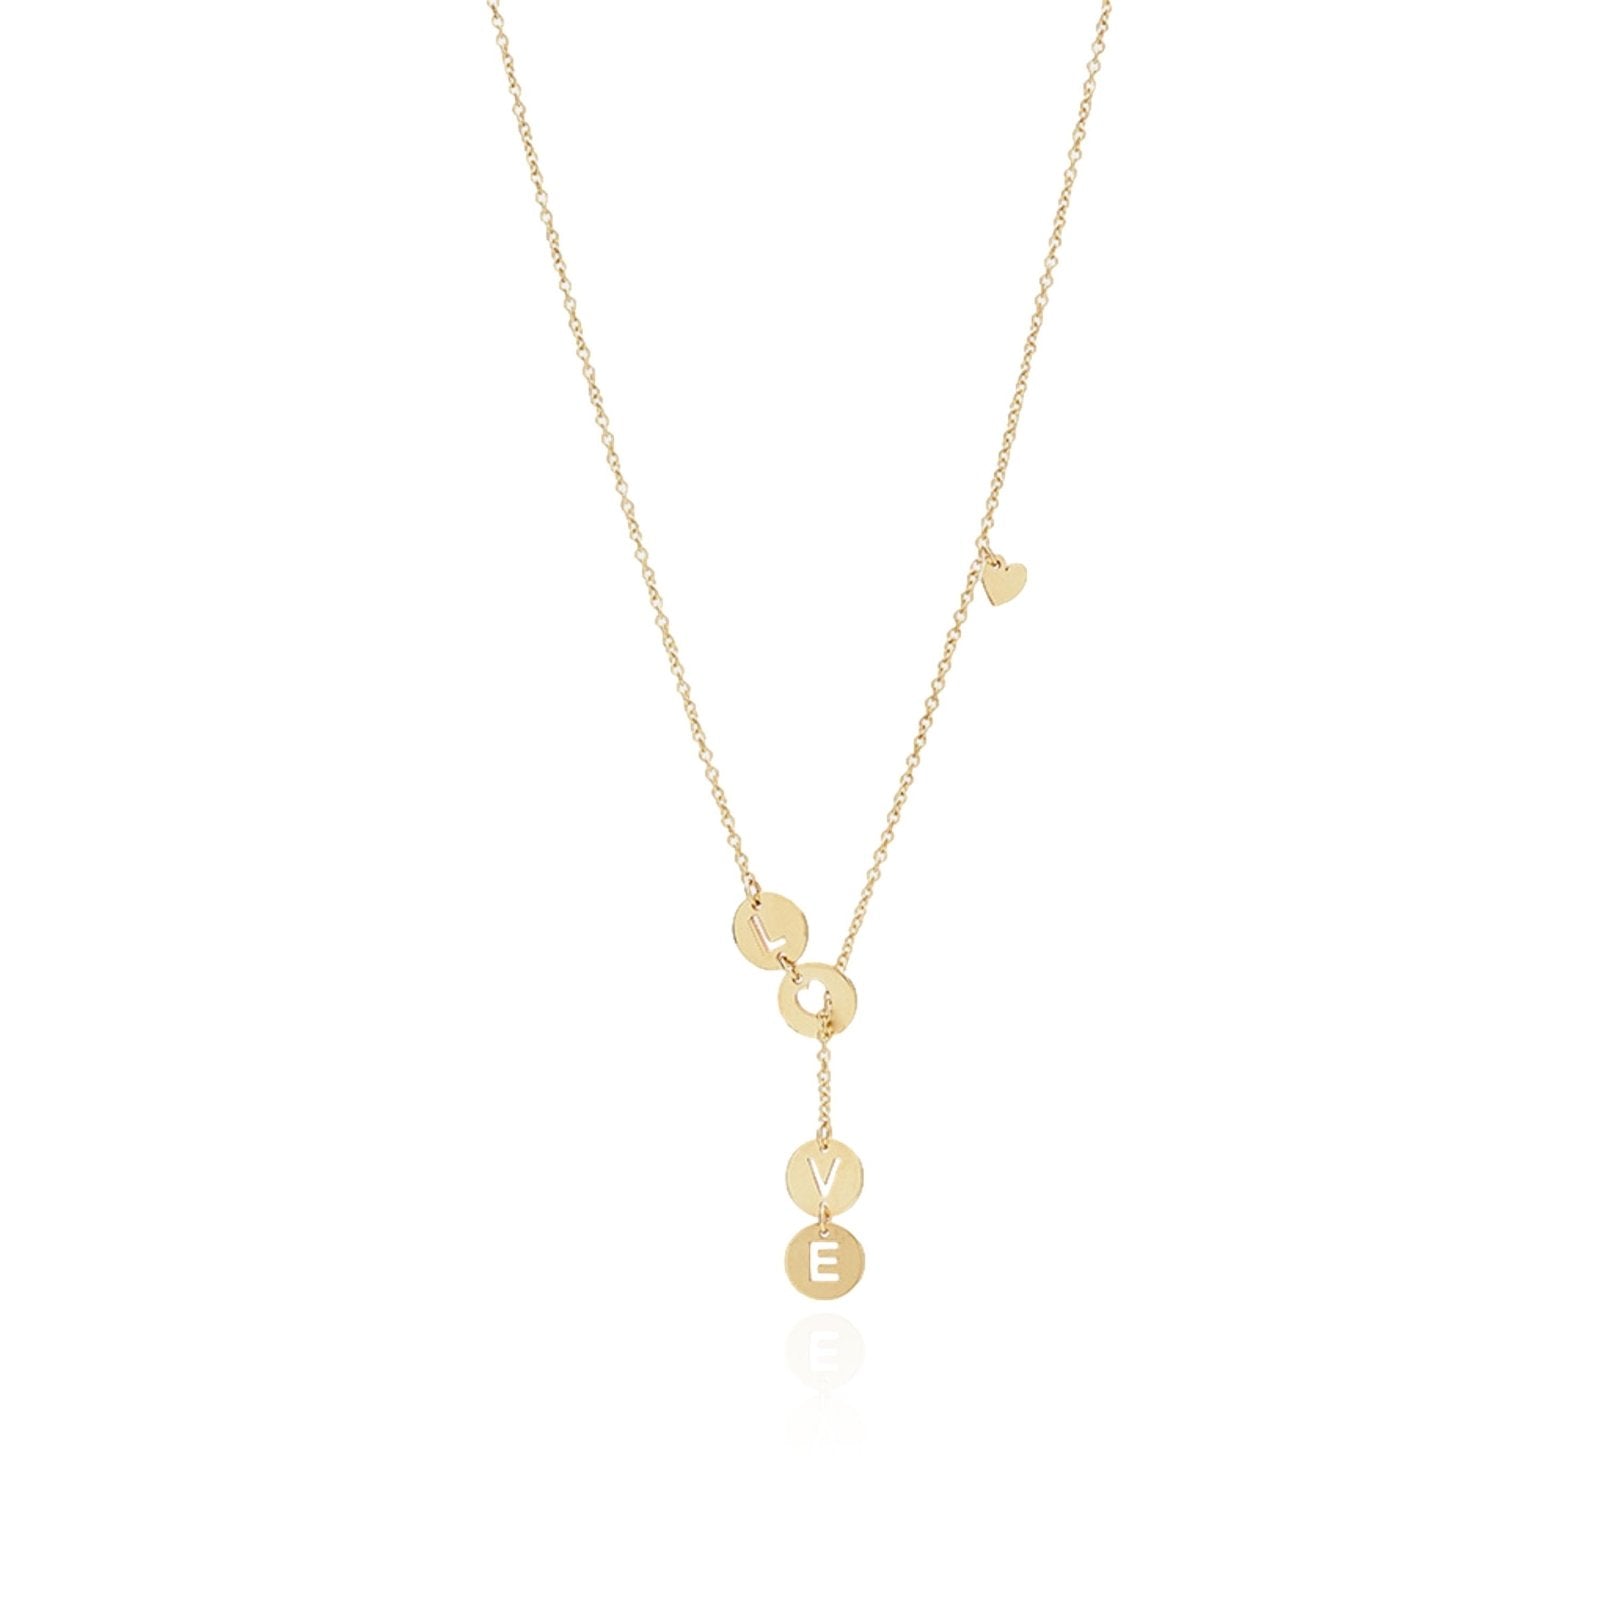 Love Lariat Necklace in Solid 10k Yellow Gold Necklaces Estella Collection #product_description# 10k Layering Necklace Make Collection #tag4# #tag5# #tag6# #tag7# #tag8# #tag9# #tag10#